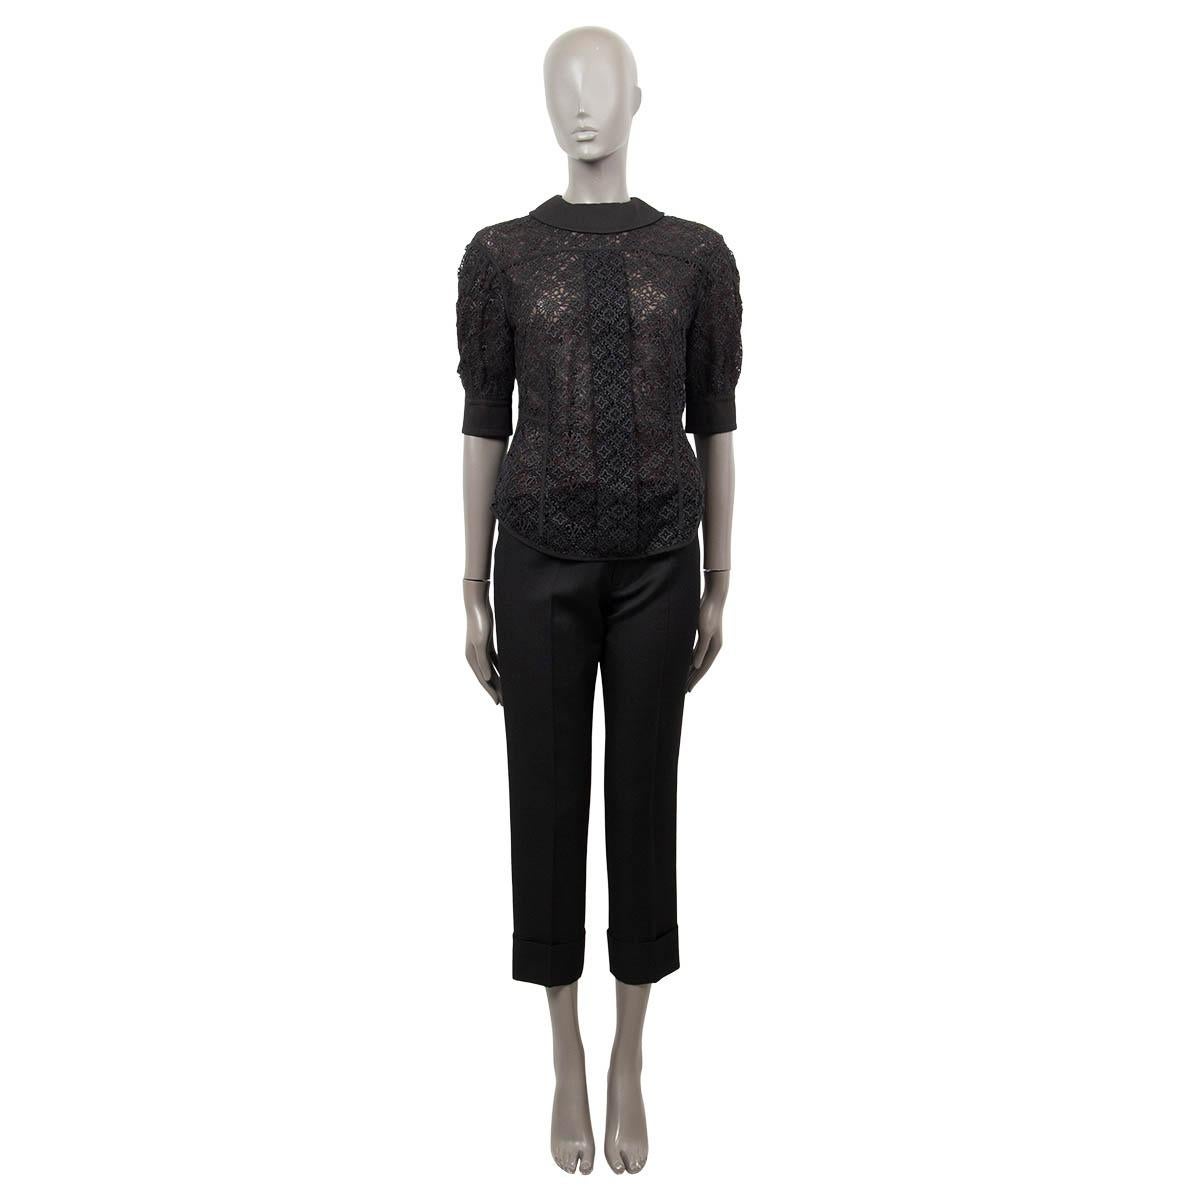 100% authentic Louis Vuitton short sleeve crochet top in black cotton (87%) and polyester (13%). Features a collared neck and big black buttons on the back. Opens with push buttons on the back. Lined in brown tulle silk (100%). Has been worn and is